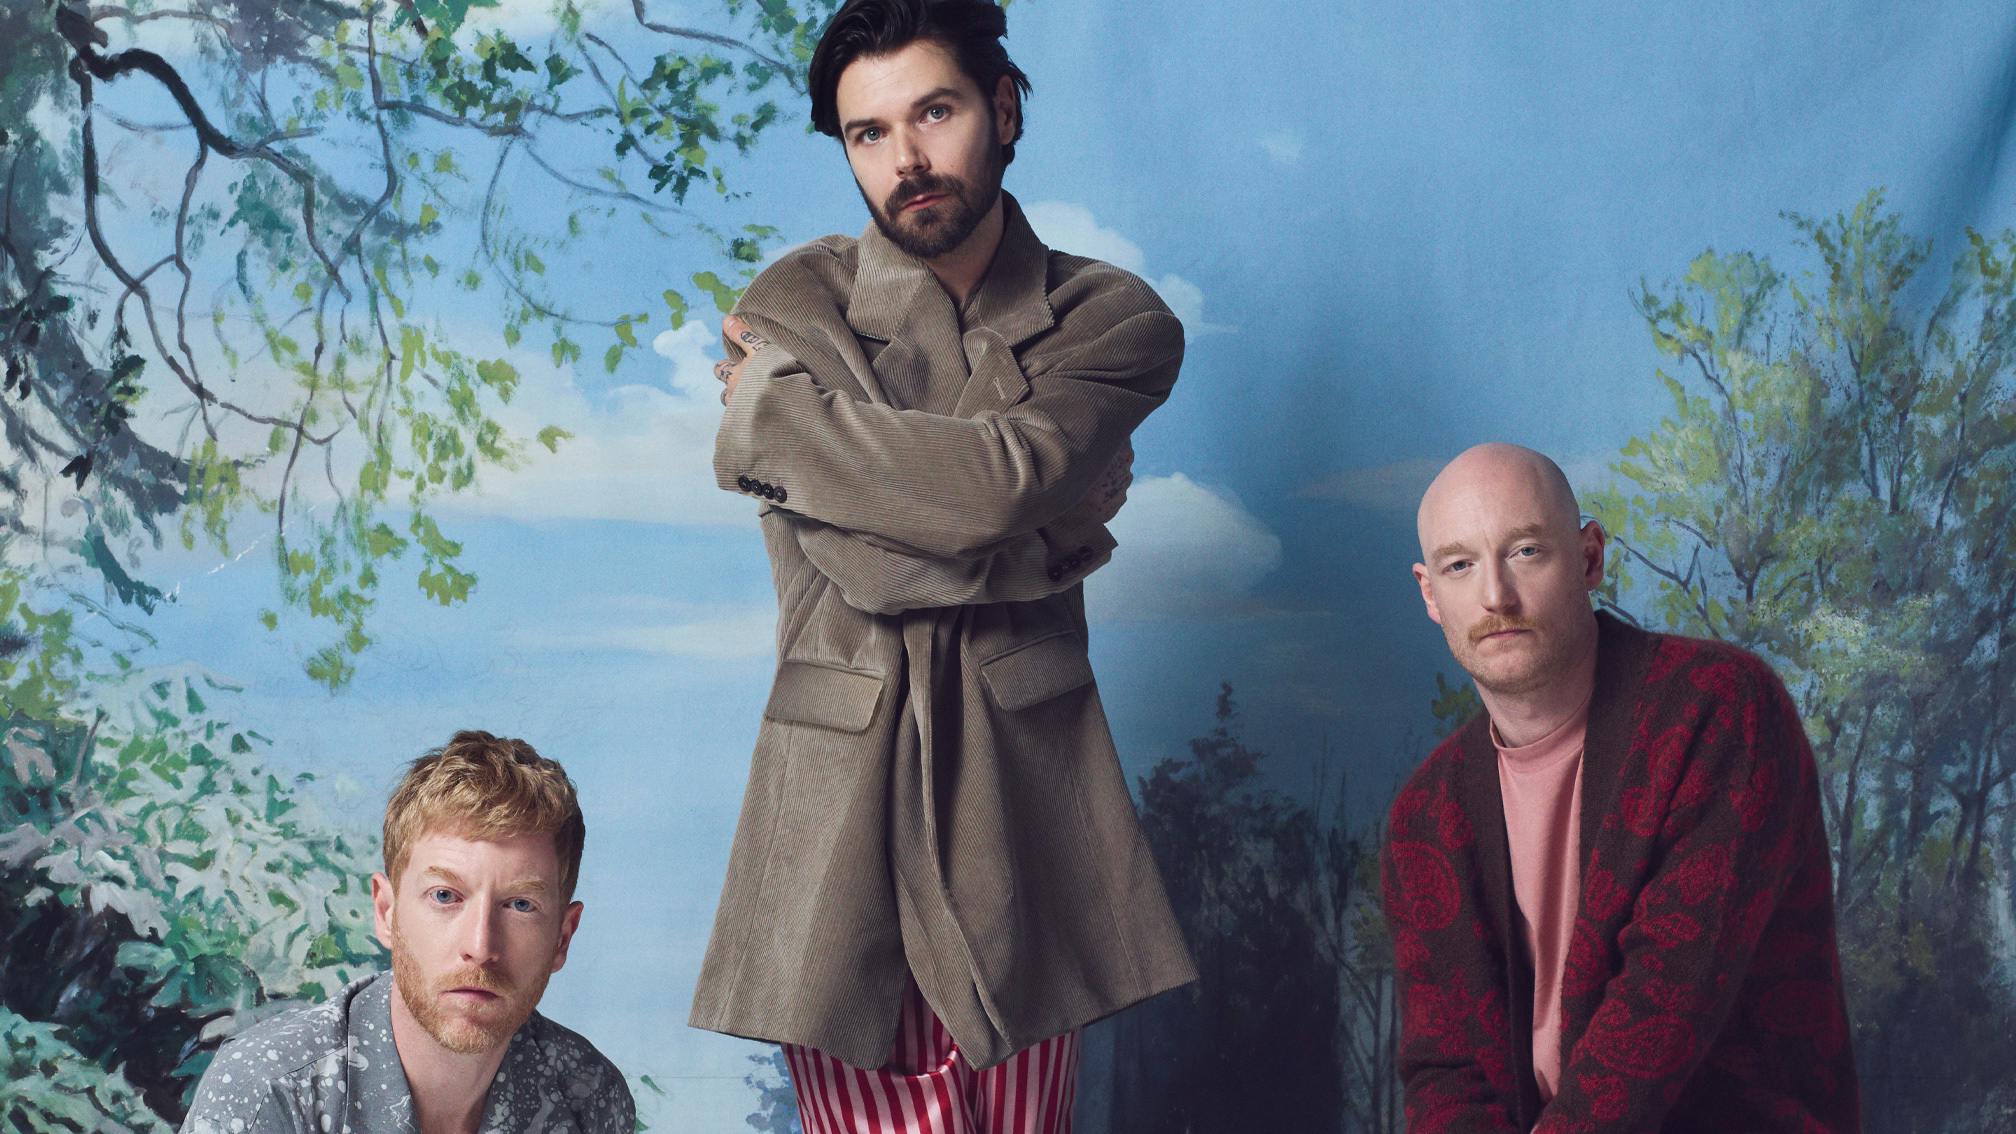 Watch Simon Neil Play A New Biffy Clyro Song At Home